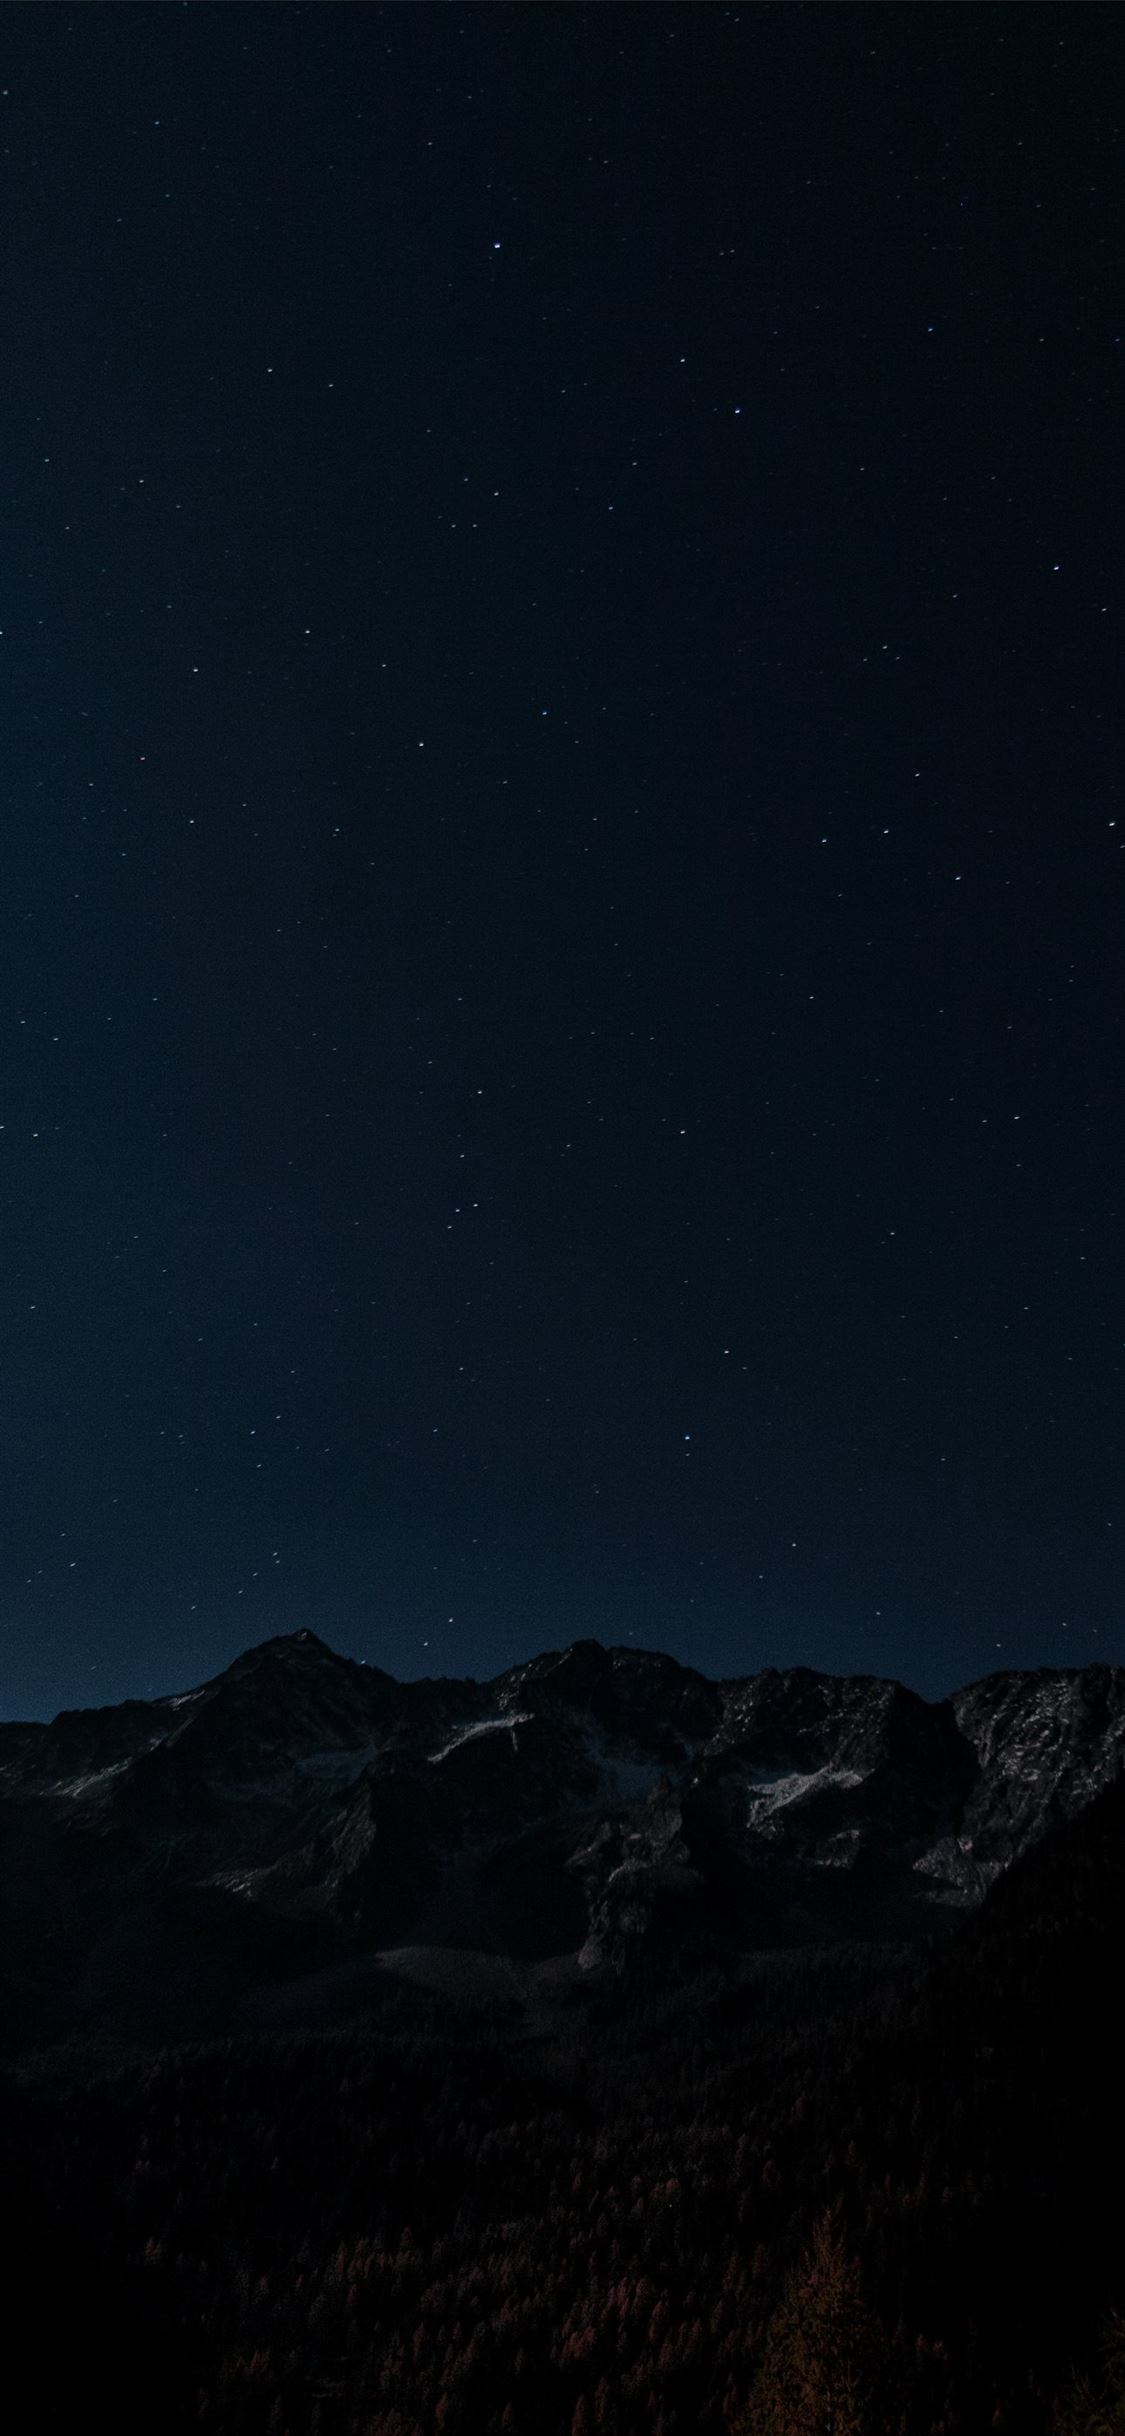 gray and brown mountains under starry night photo iPhone wallpaper 